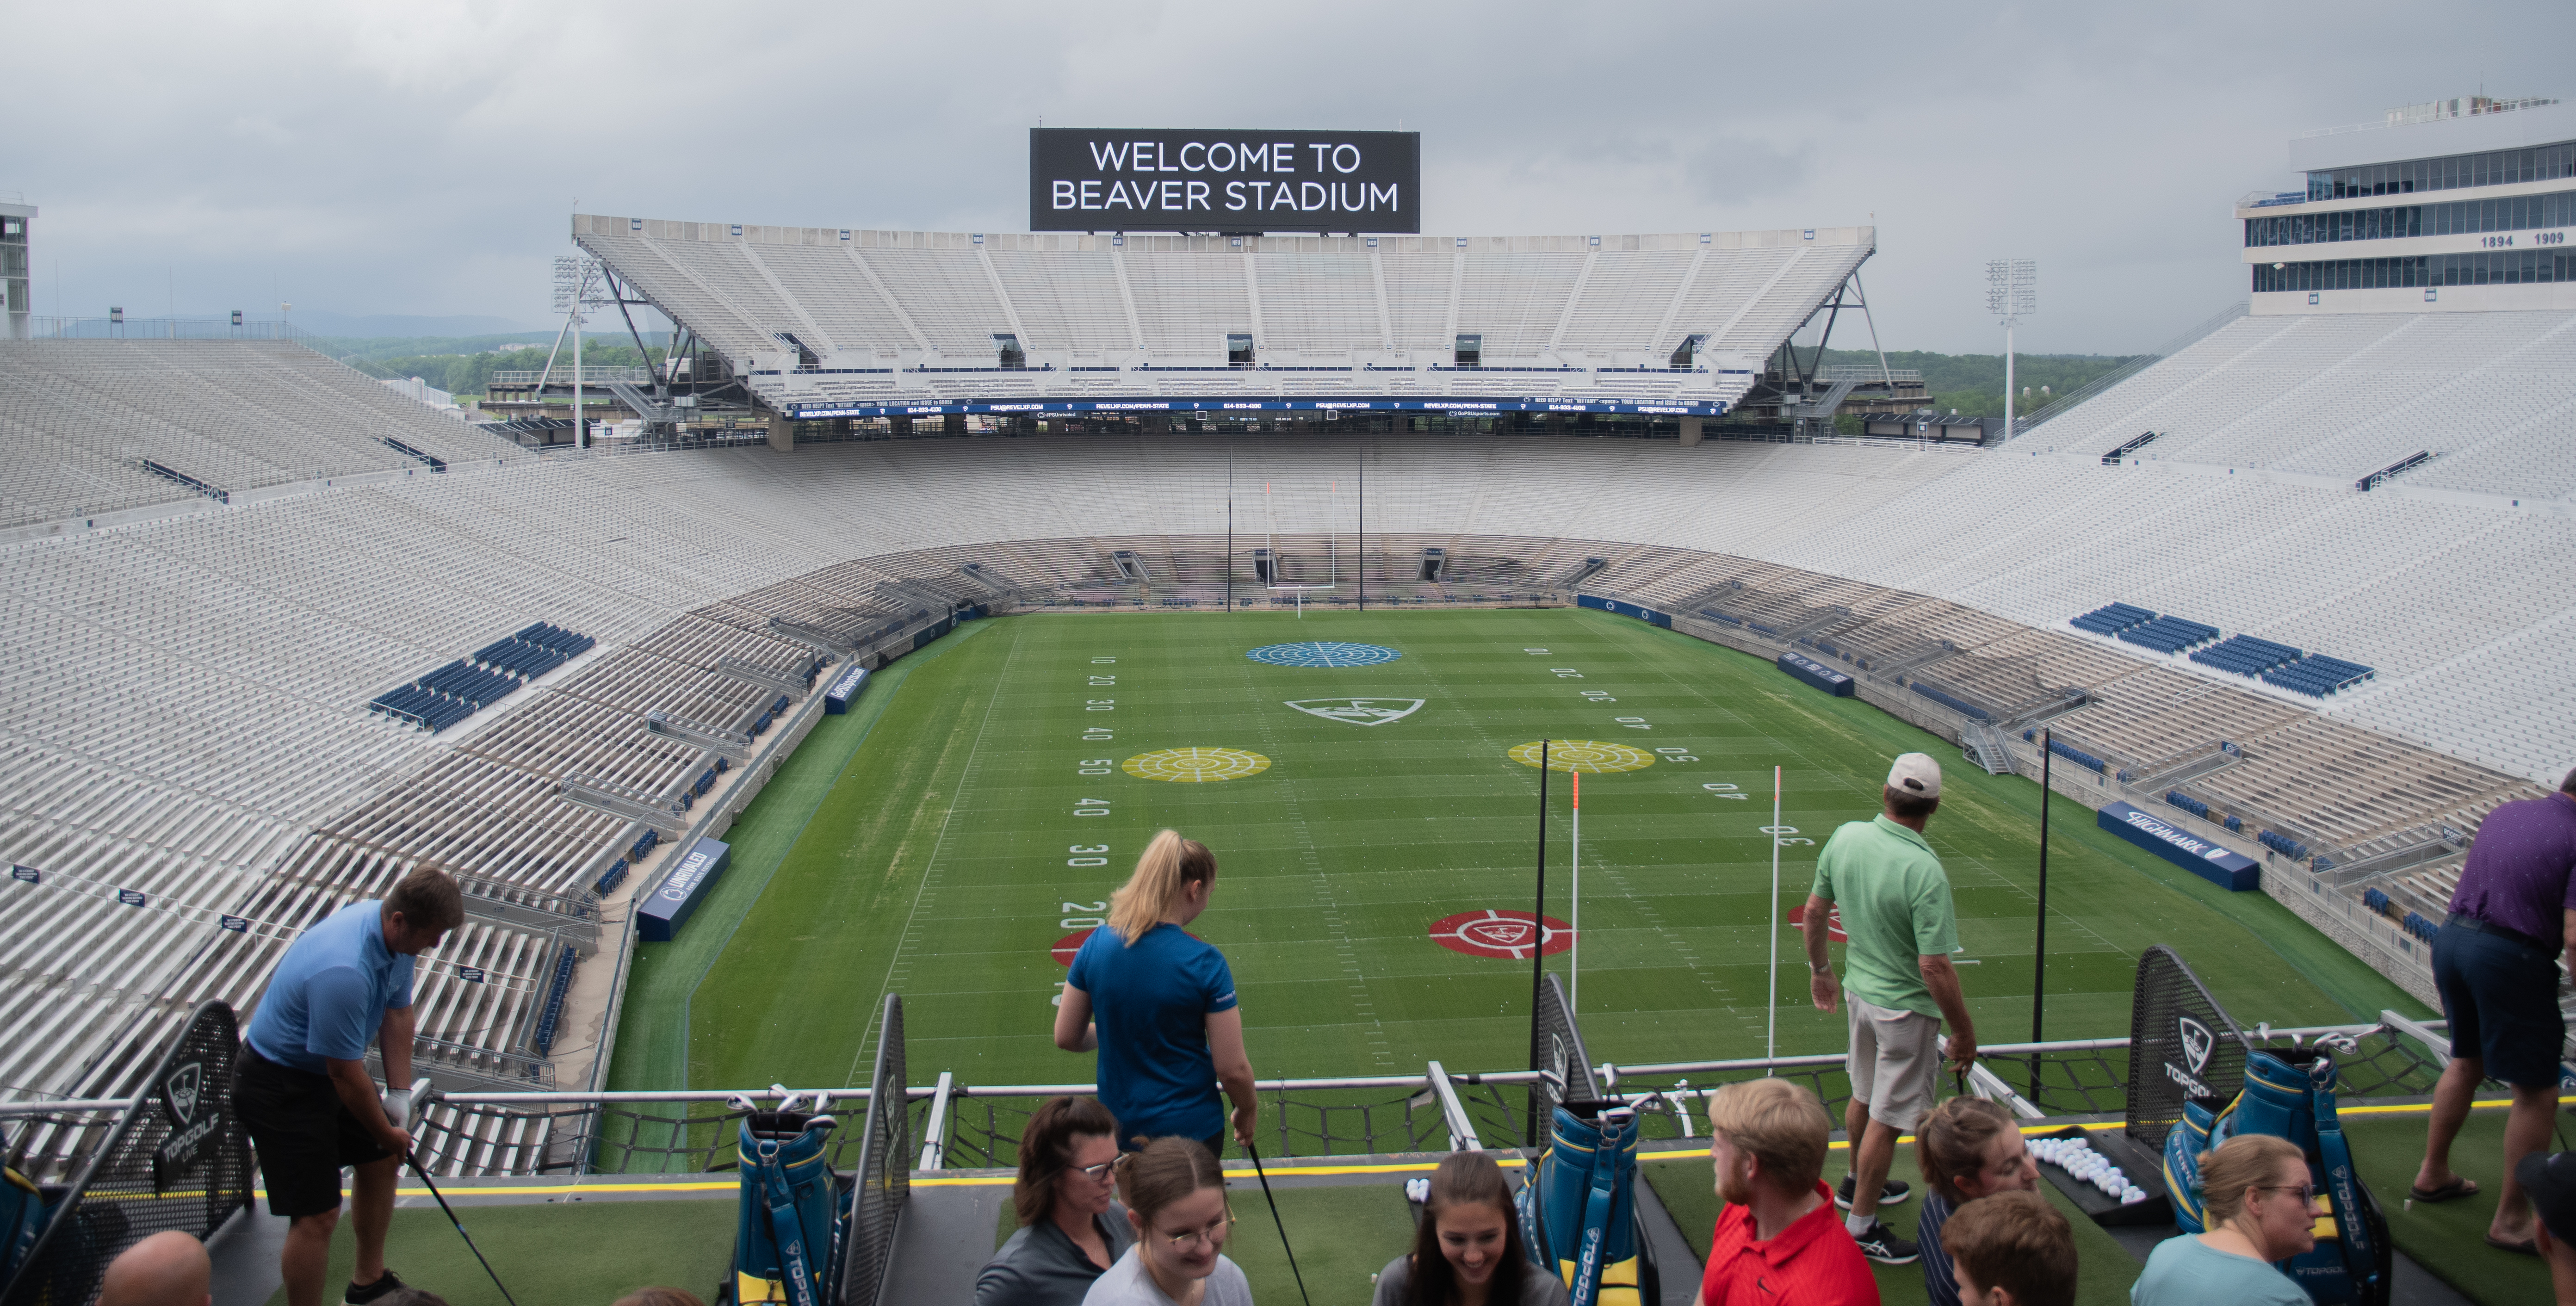 Fans reminded of Beaver Stadium bag policy